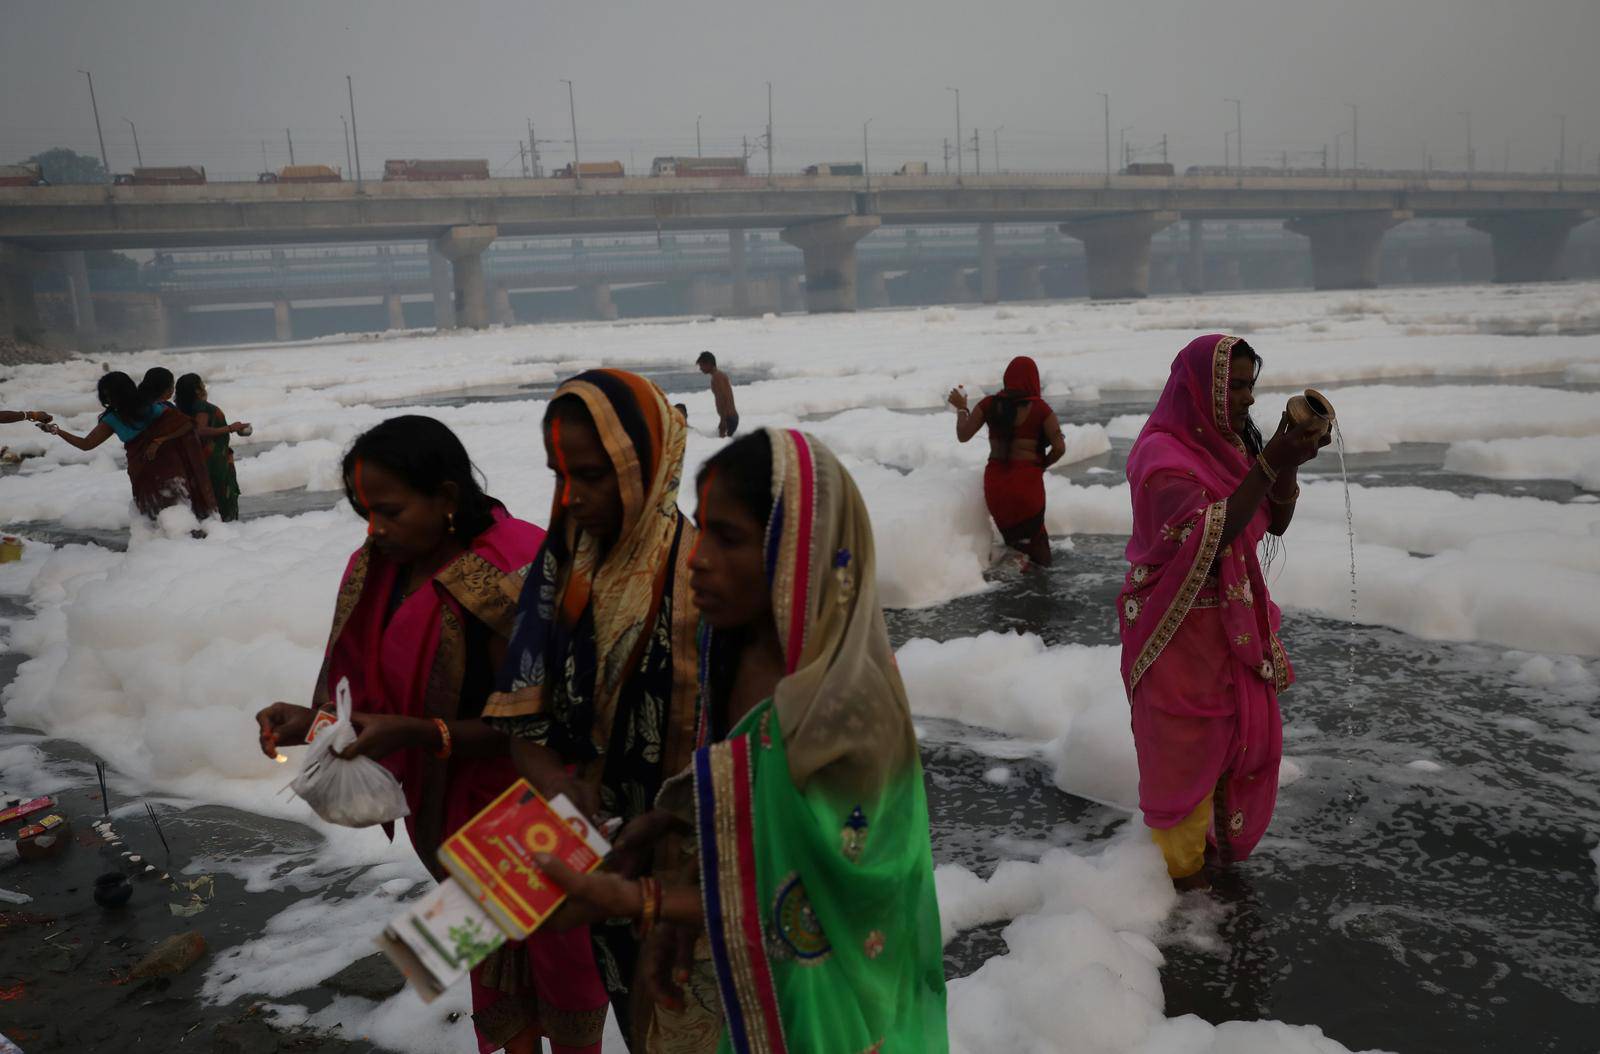 Women pray as they stand amidst the foam covering the polluted Yamuna river on a smoggy morning in New Delhi